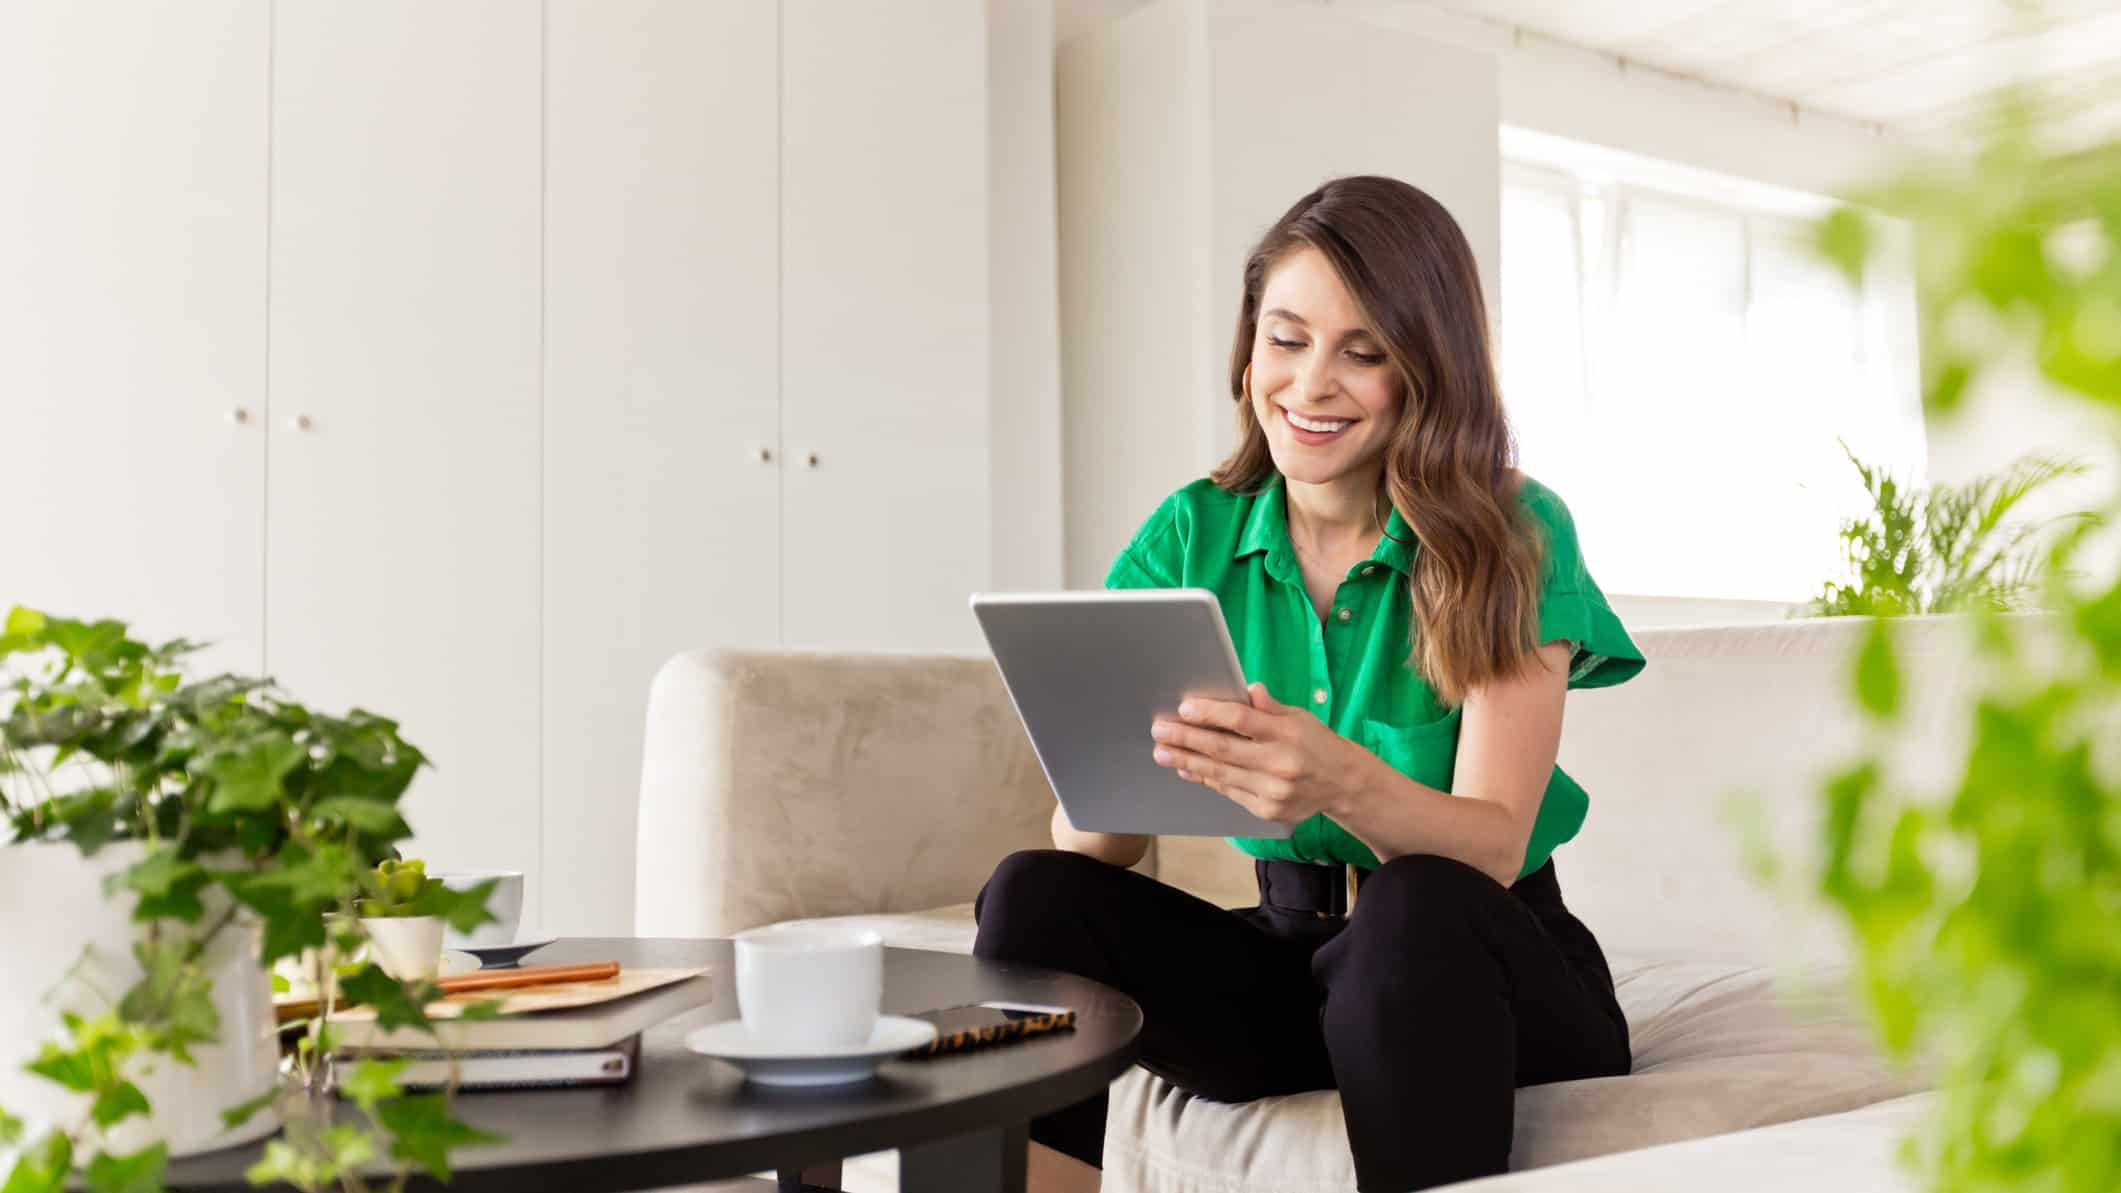 a happy woman smiles as she looks at a tablet in a room with green plantlife. She is also wearing a green shirt.